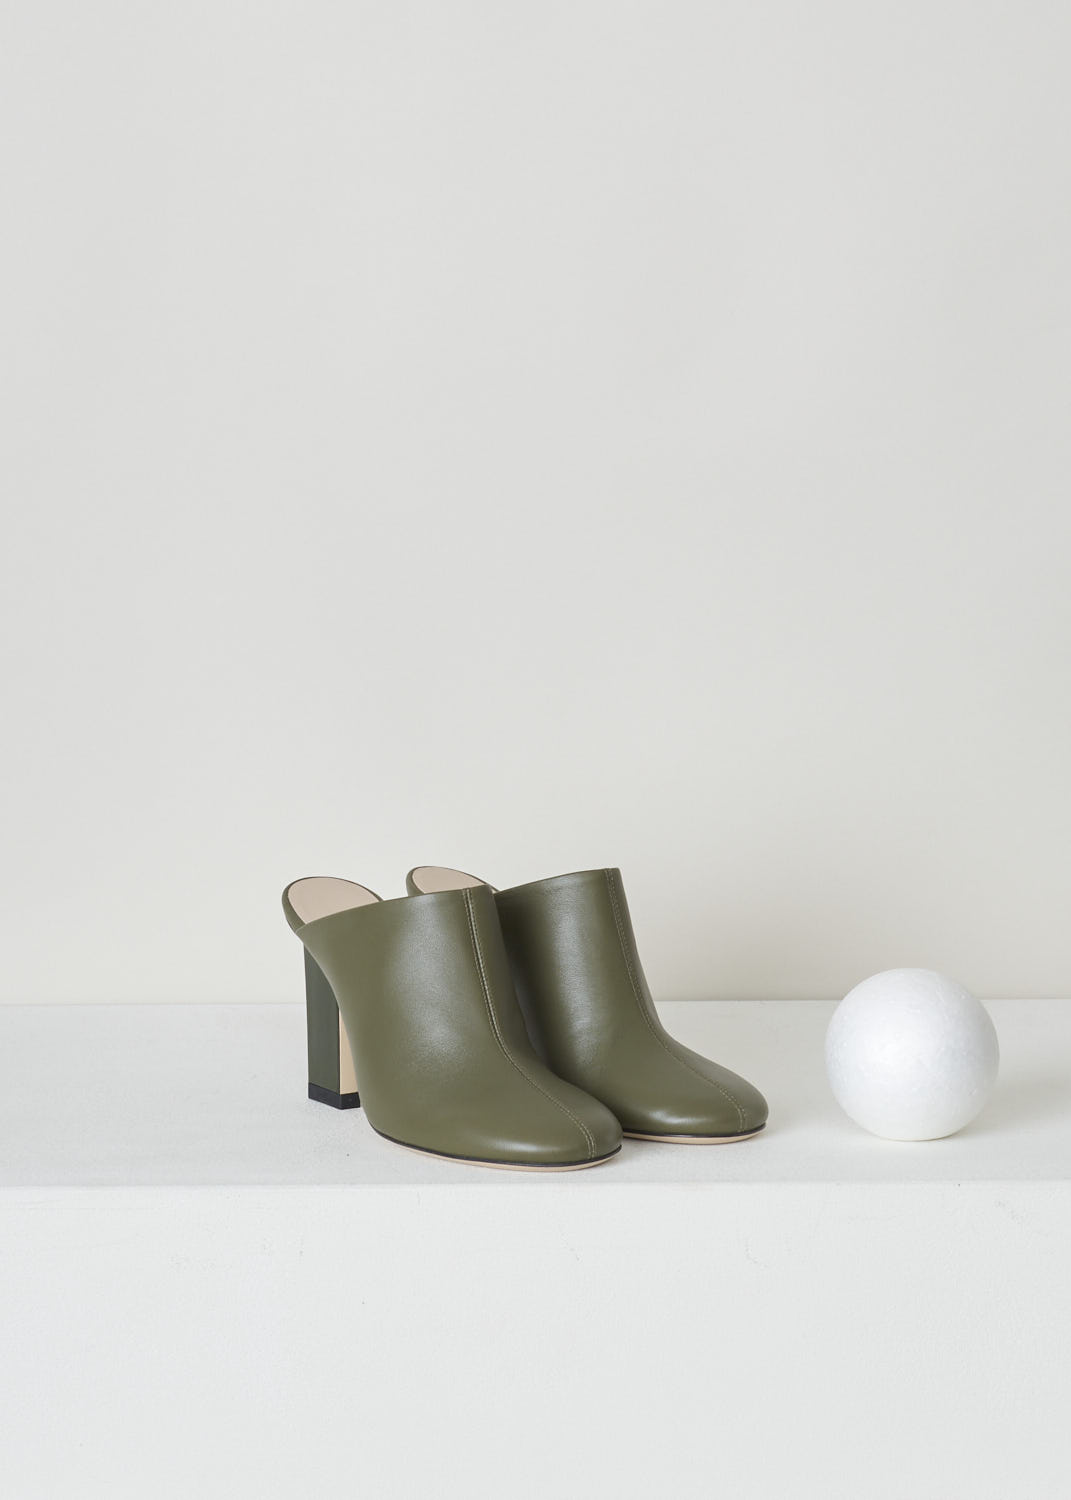 WANDLER, OLIVE GREEN MULES WITH BLOCK HEEL, CASTA_MULE_20210_341201_2629_OLIVE, Green, Front, These olive green slip-in mules feature a rectangular block heel and a round toe. A decorative seam runs along the front of the shoe.

Heel height: 9.5 cm / 3.7 inch 

